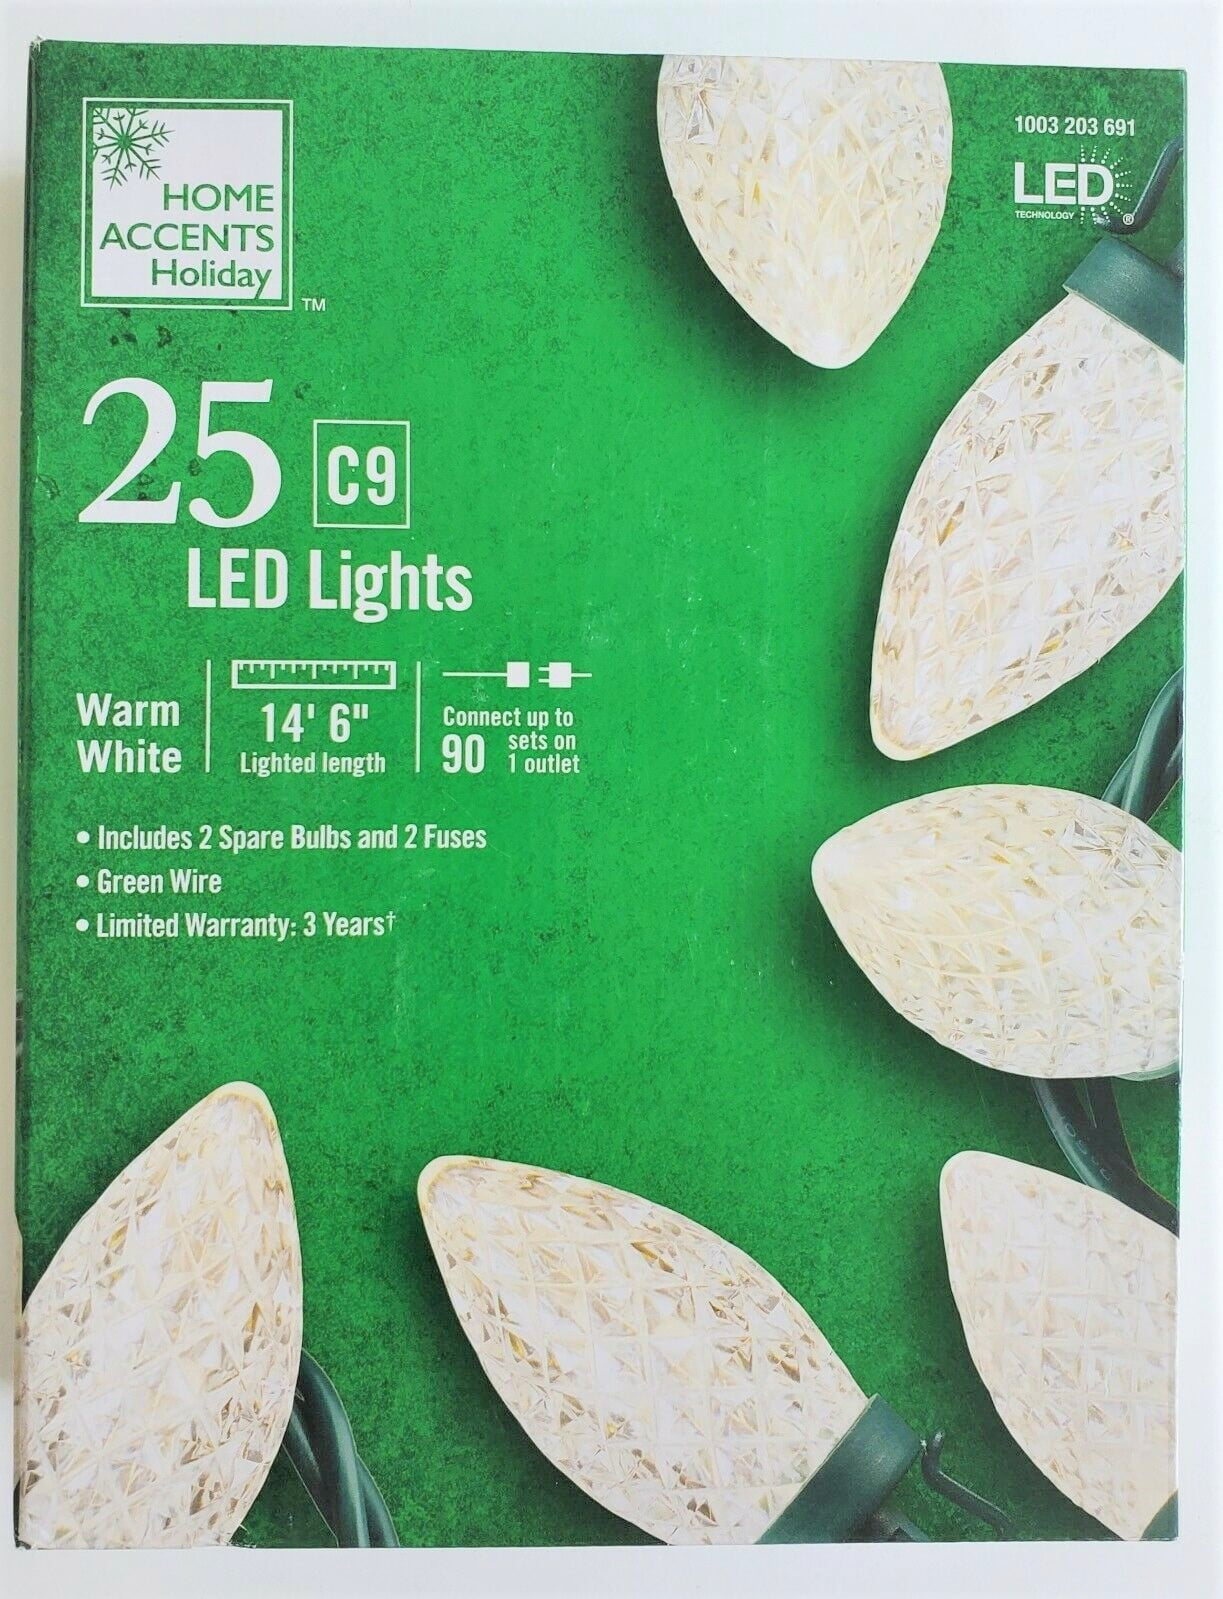 Home accents holiday 25 light cool white led c9 lights Home Accents Holiday 15 6 Ft 25 Light Warm White Led C9 Light String Ty290 815r Walmart Com Walmart Com